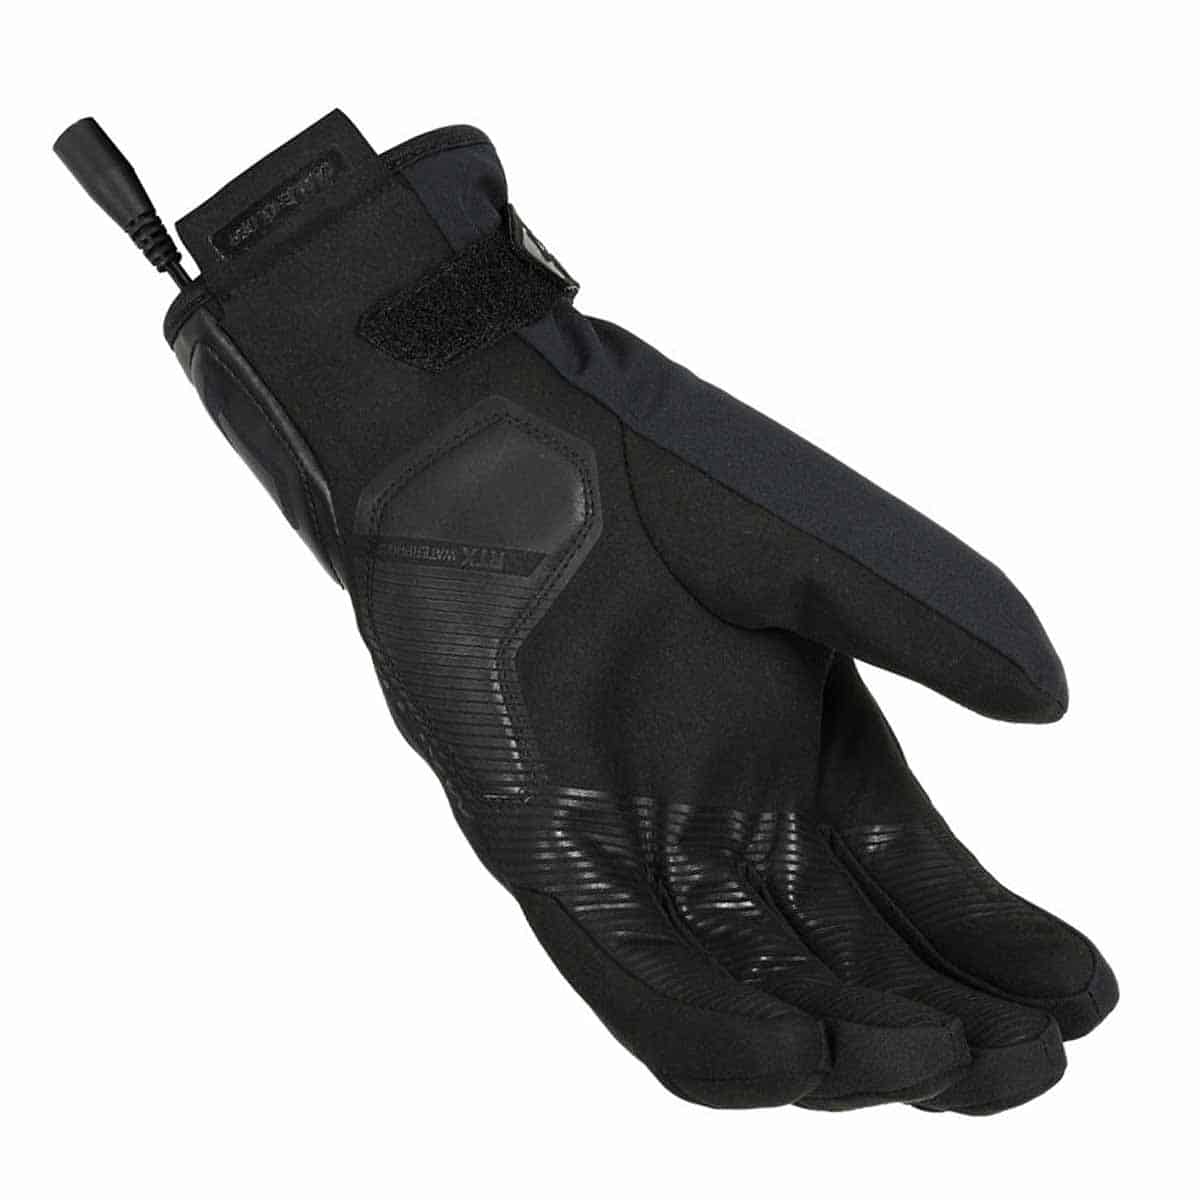 Macna Evolve Heated Gloves: Heated gloves designed to be plugged into the motorcycle battery 2